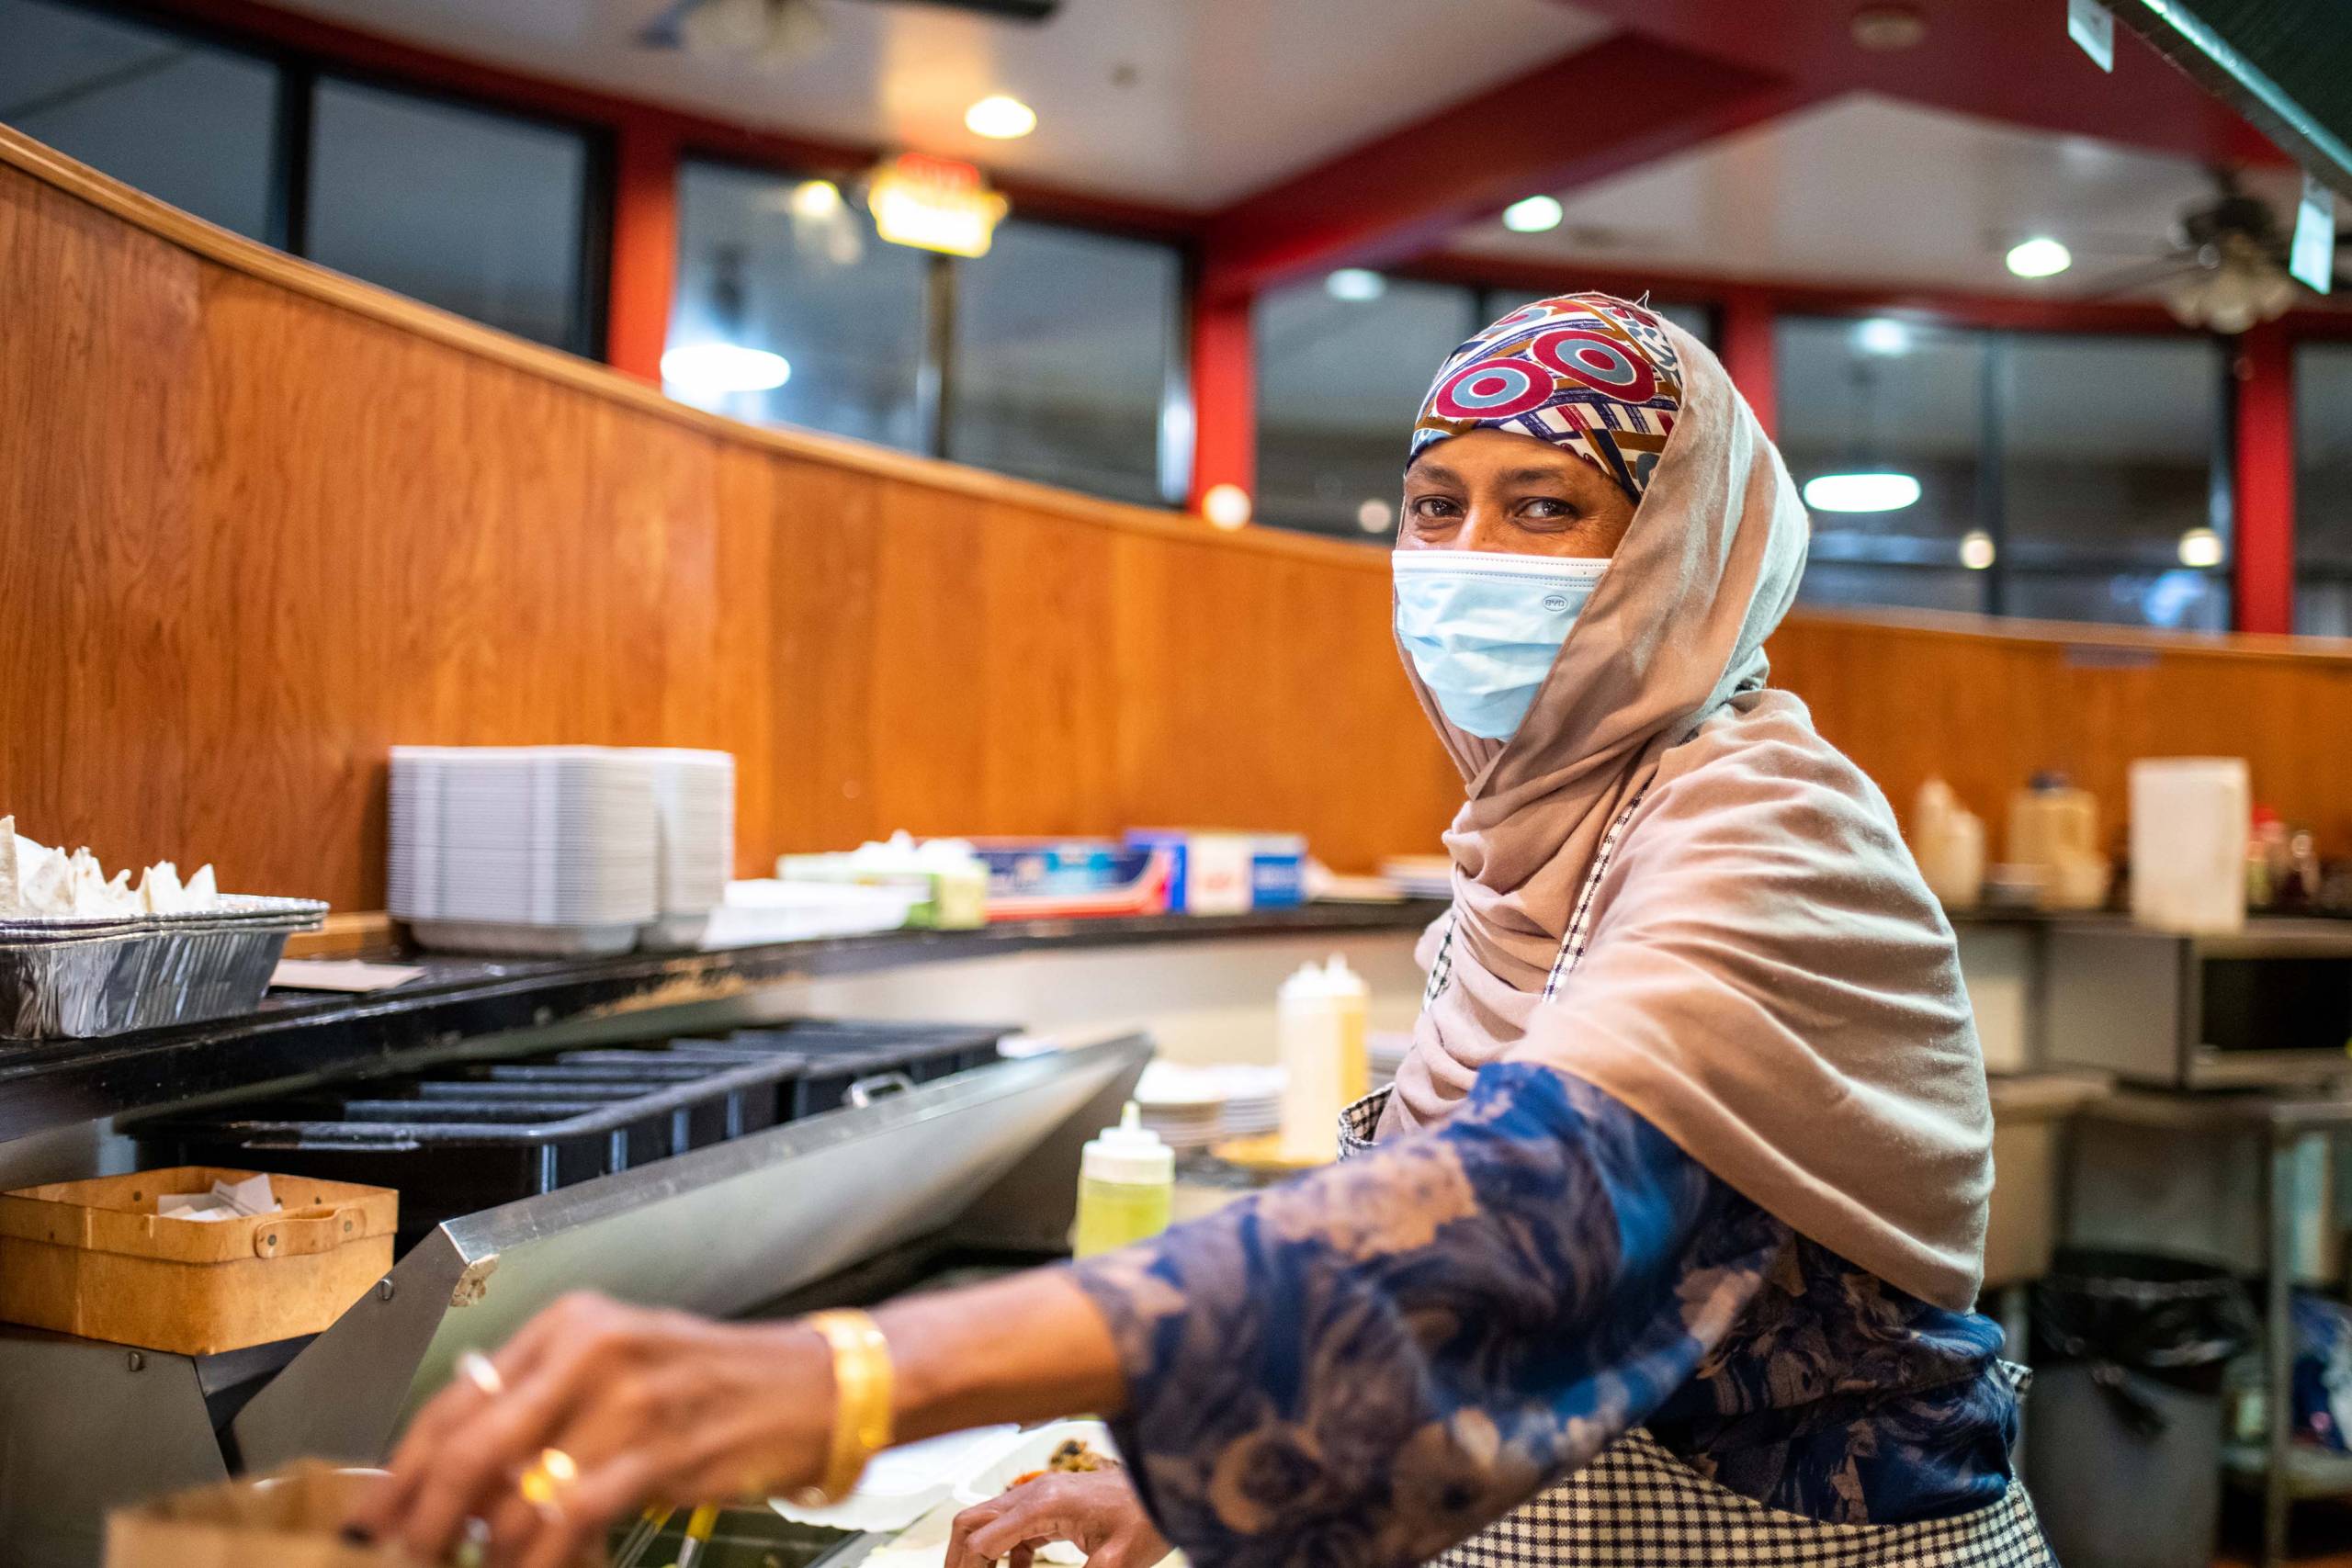 A woman wearing a face mask and a hajib prepares food over a flat-top griddle.